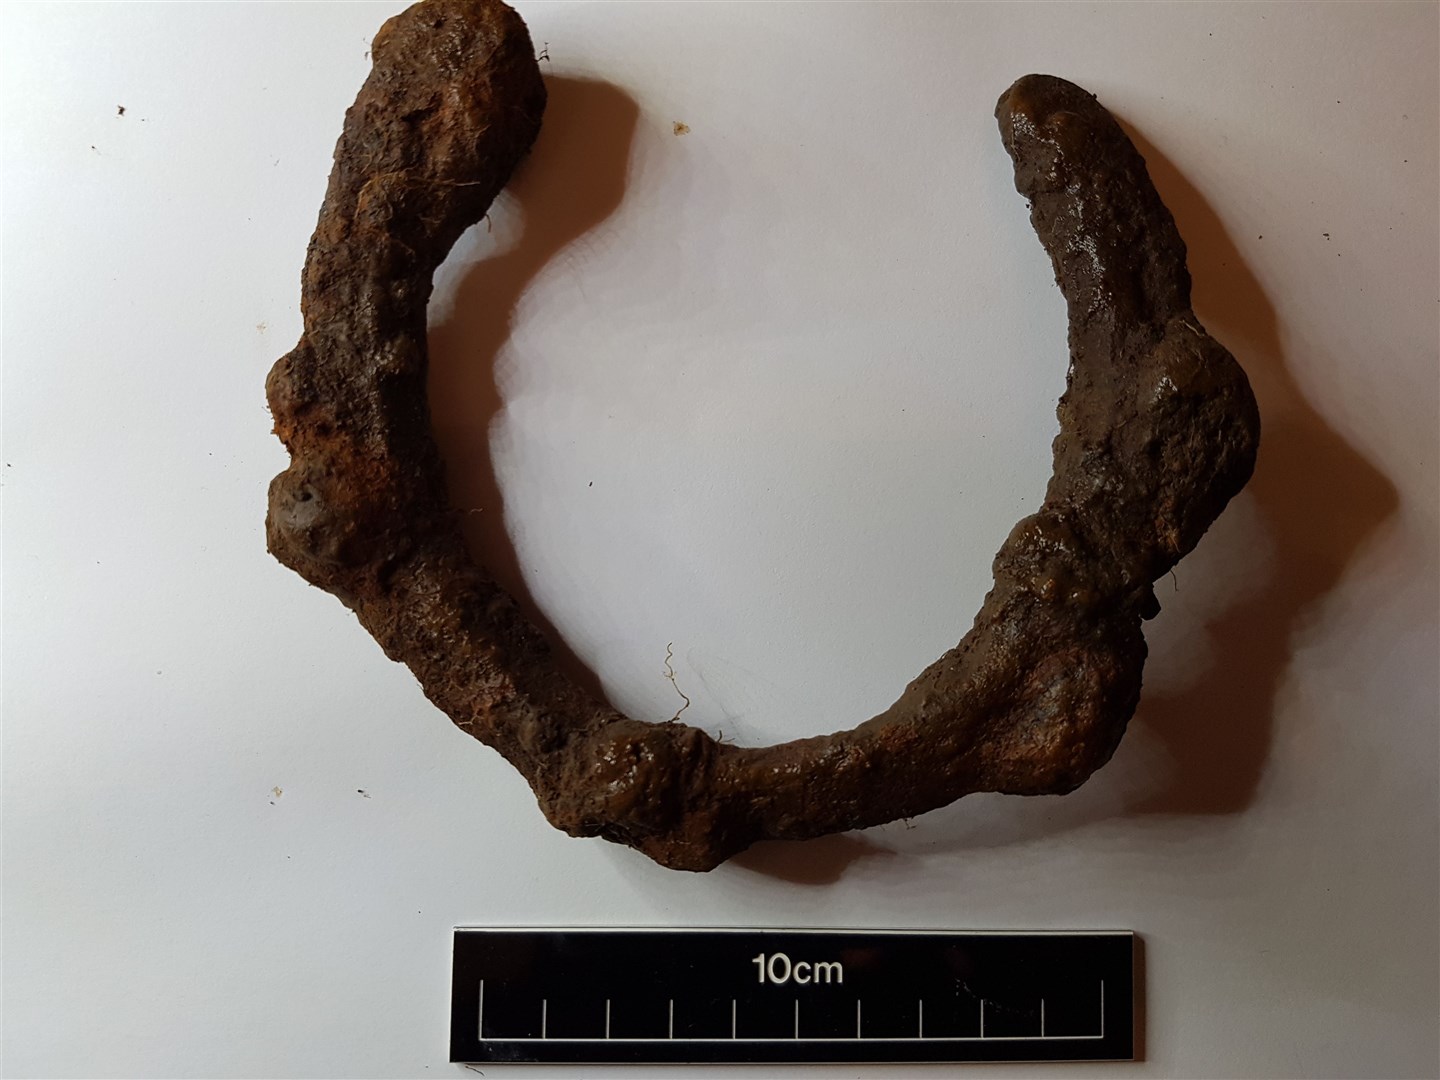 A horse shoe that is either related to the battle or agriculture.